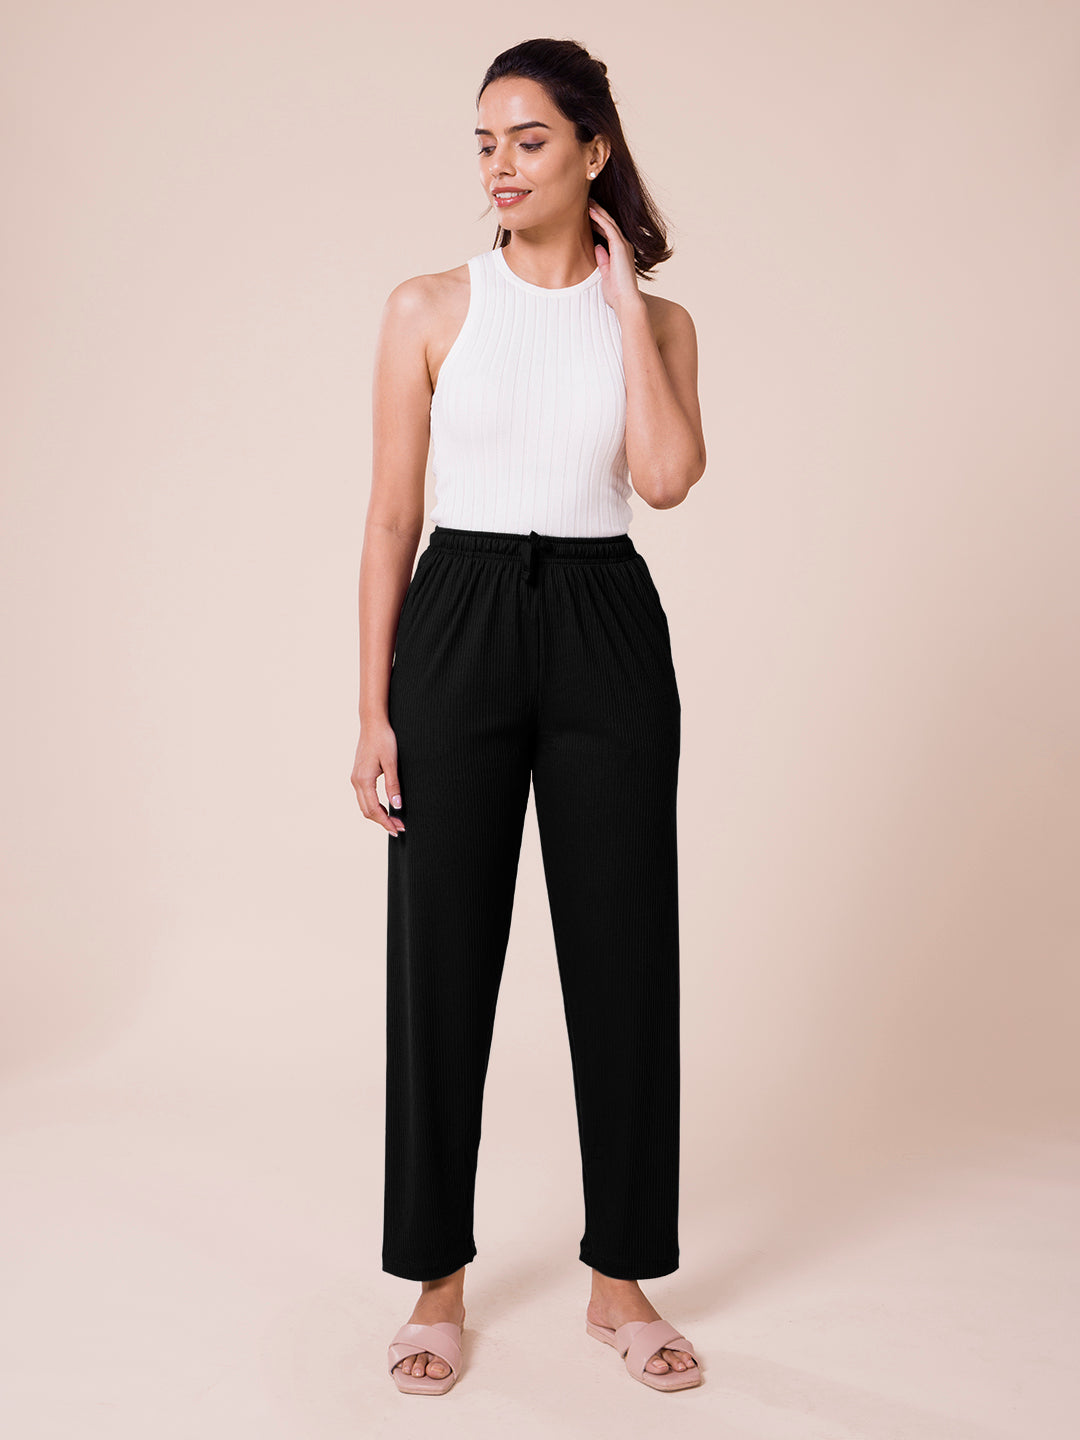 Buy KRAUS Black Solid Cotton Blend Skinny Fit Women's Casual Pants |  Shoppers Stop